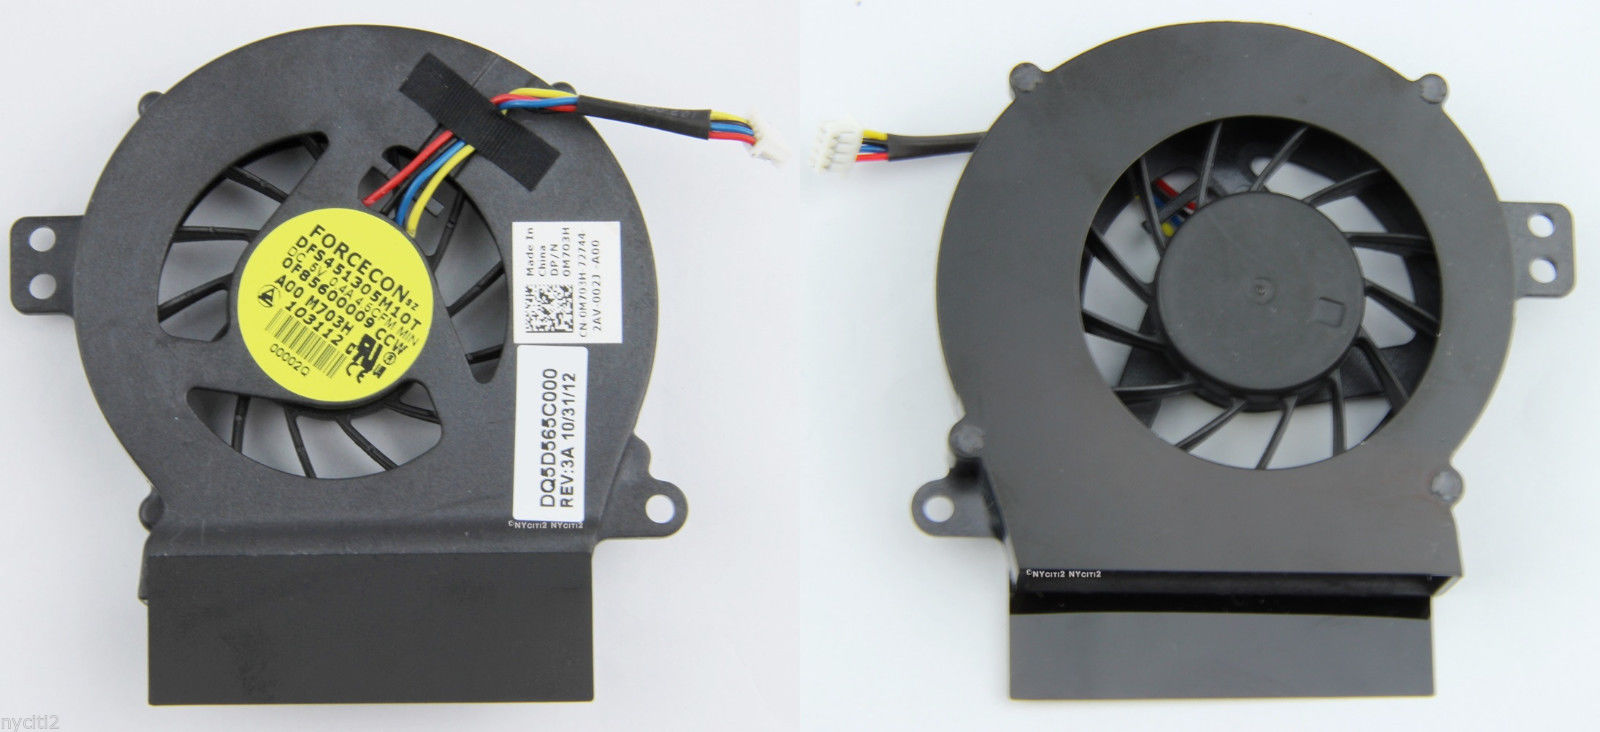 Laptop CPU Fan for Dell Vostro compatible with P/N 0M703H DQ5D565C000 - Click Image to Close